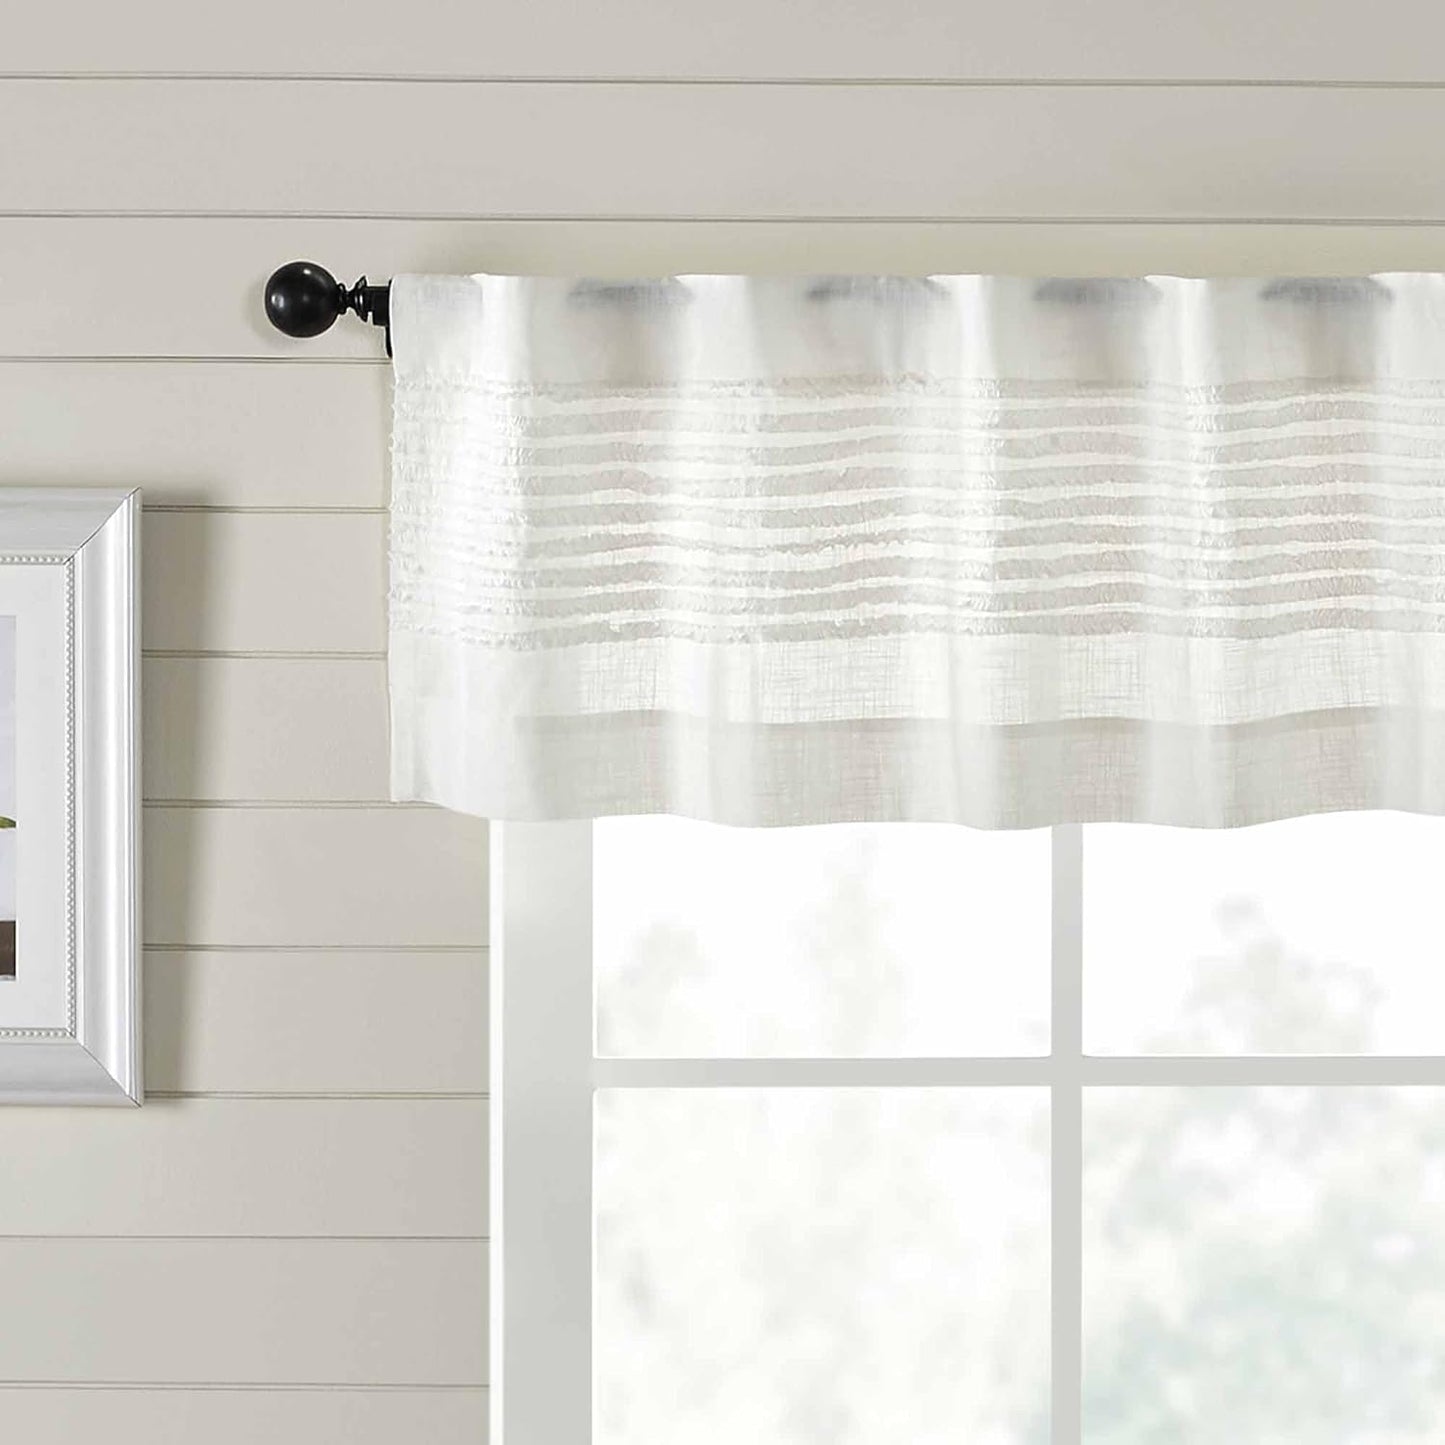 Kathryn Tier Curtains, Set of 2, 24" Long, Ruffled Curtains in a Linen-Look Soft White Cotton Semi-Sheer Fabric, Farmhouse, Cottage, Country Style Sheer Kitchen Café Curtains  Piper Classics Valance  